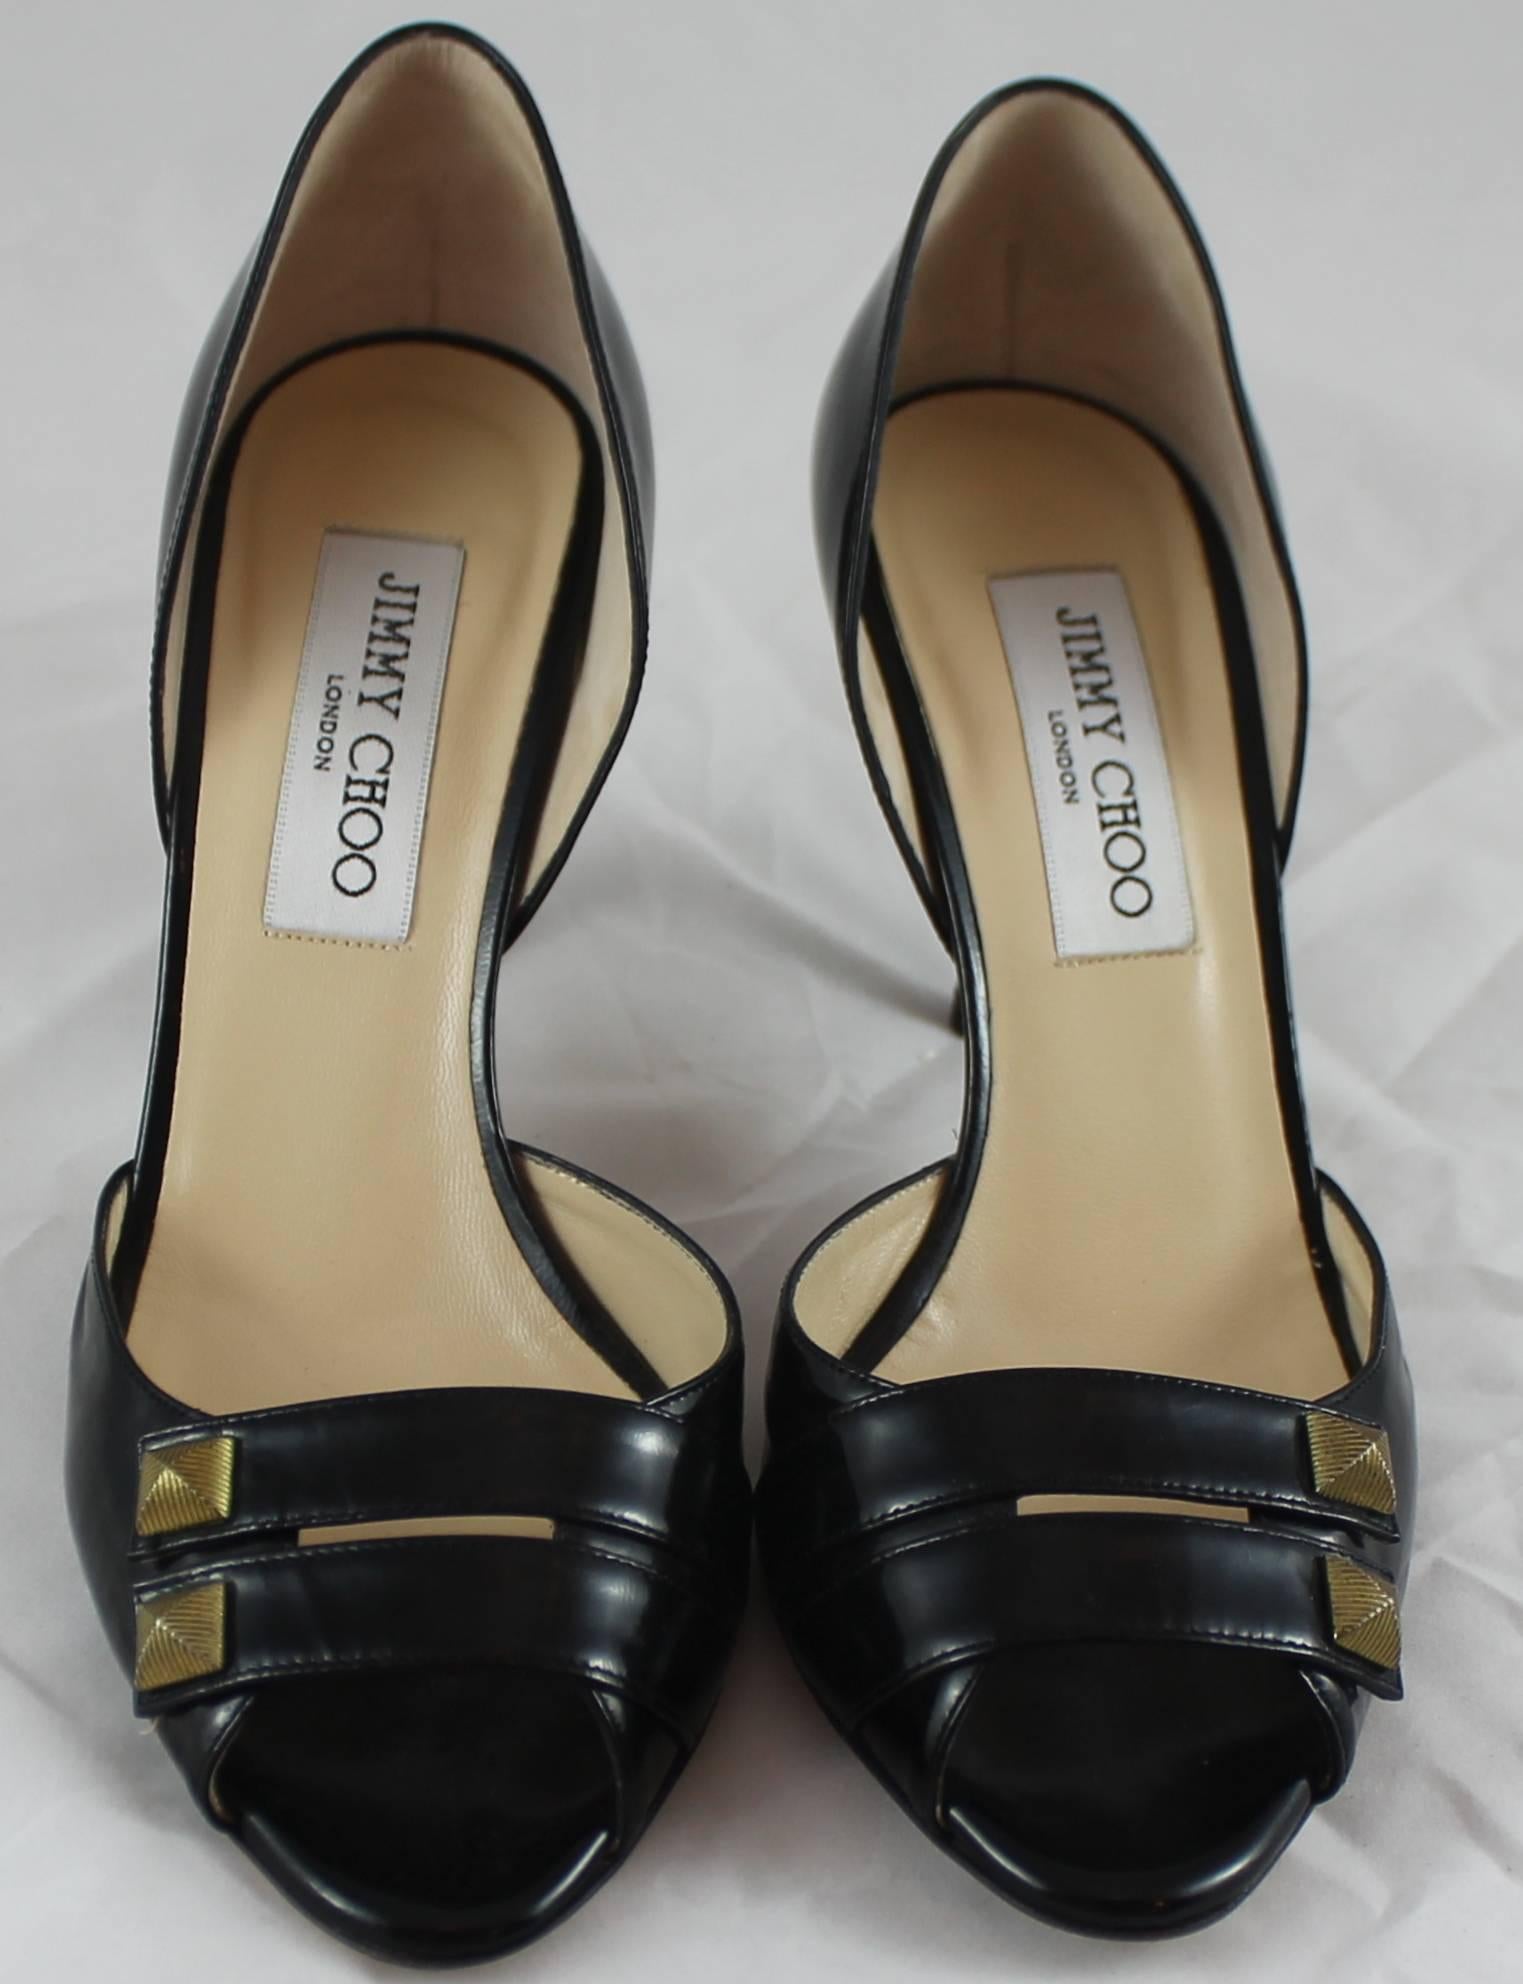 Women's Jimmy Choo Black Leather D'Orsay Heels with Double Straps and Gold Studs - 36.5